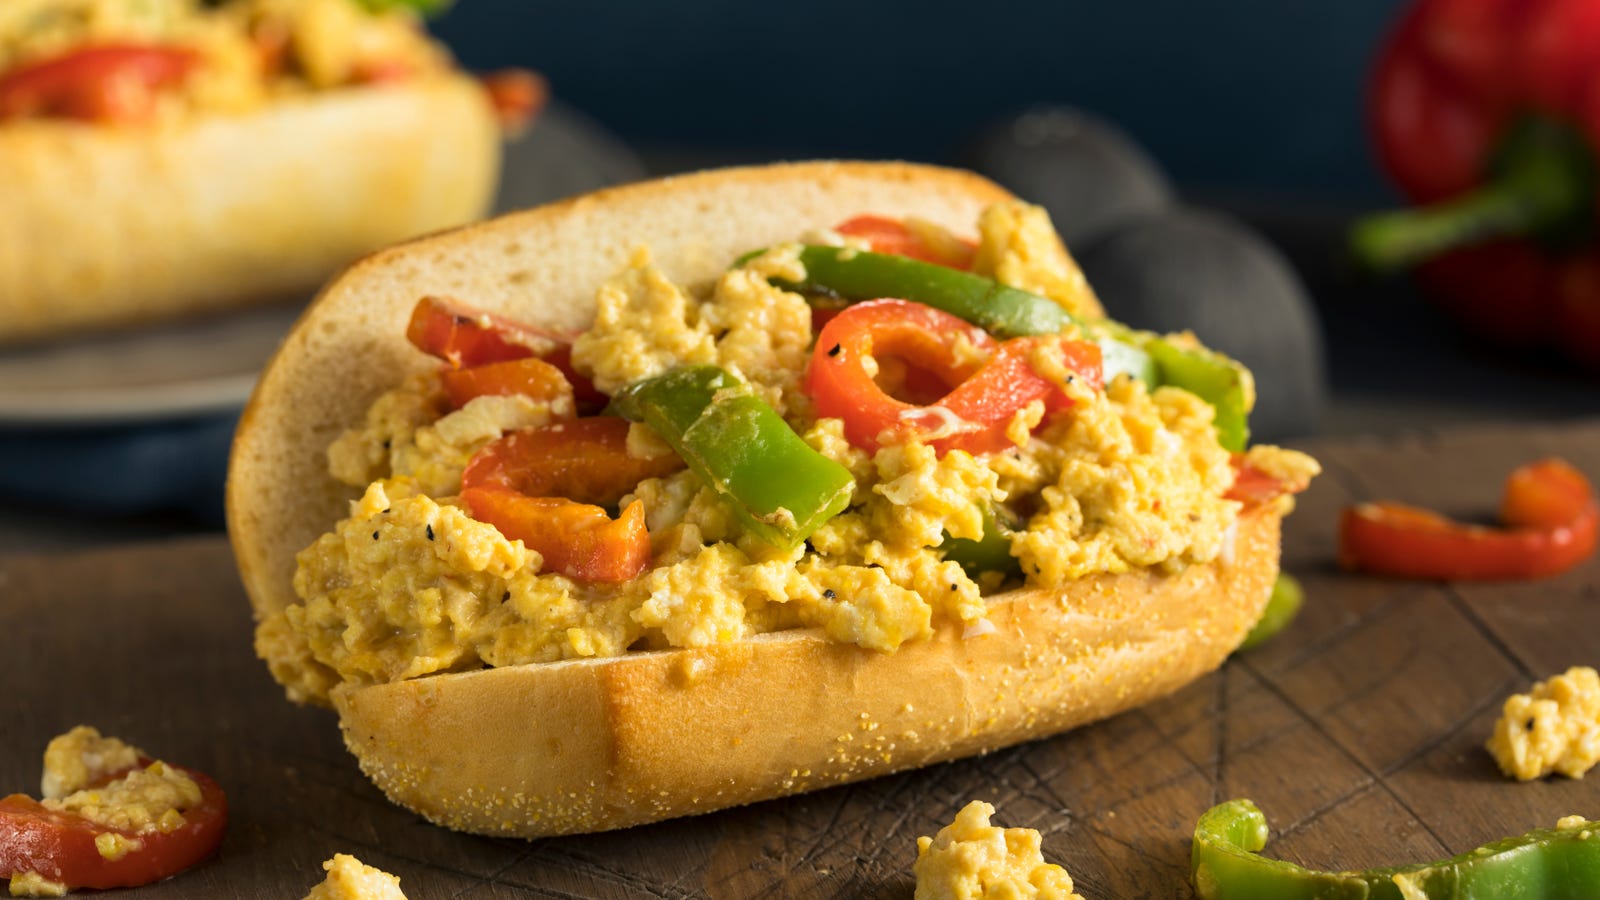 Why confine pepper-and-egg sandwich season to just 40 days?